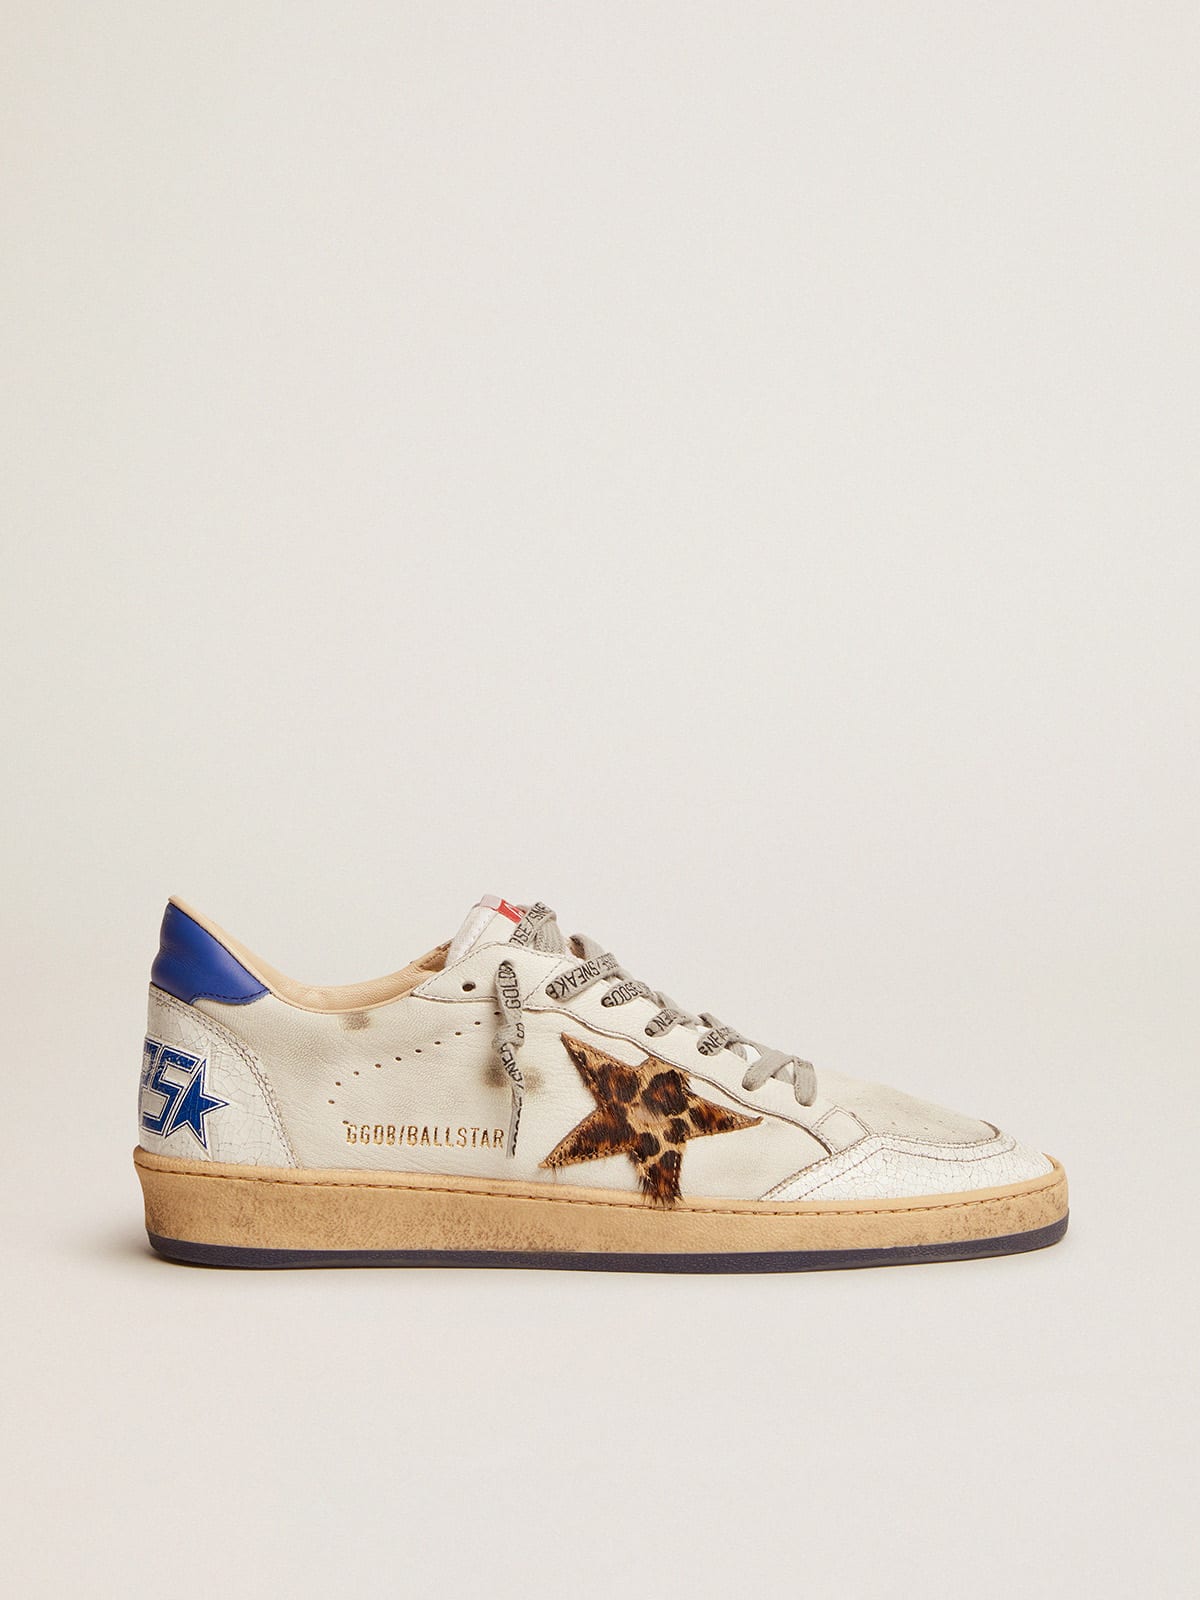 Ball Star sneakers in white leather with light blue details